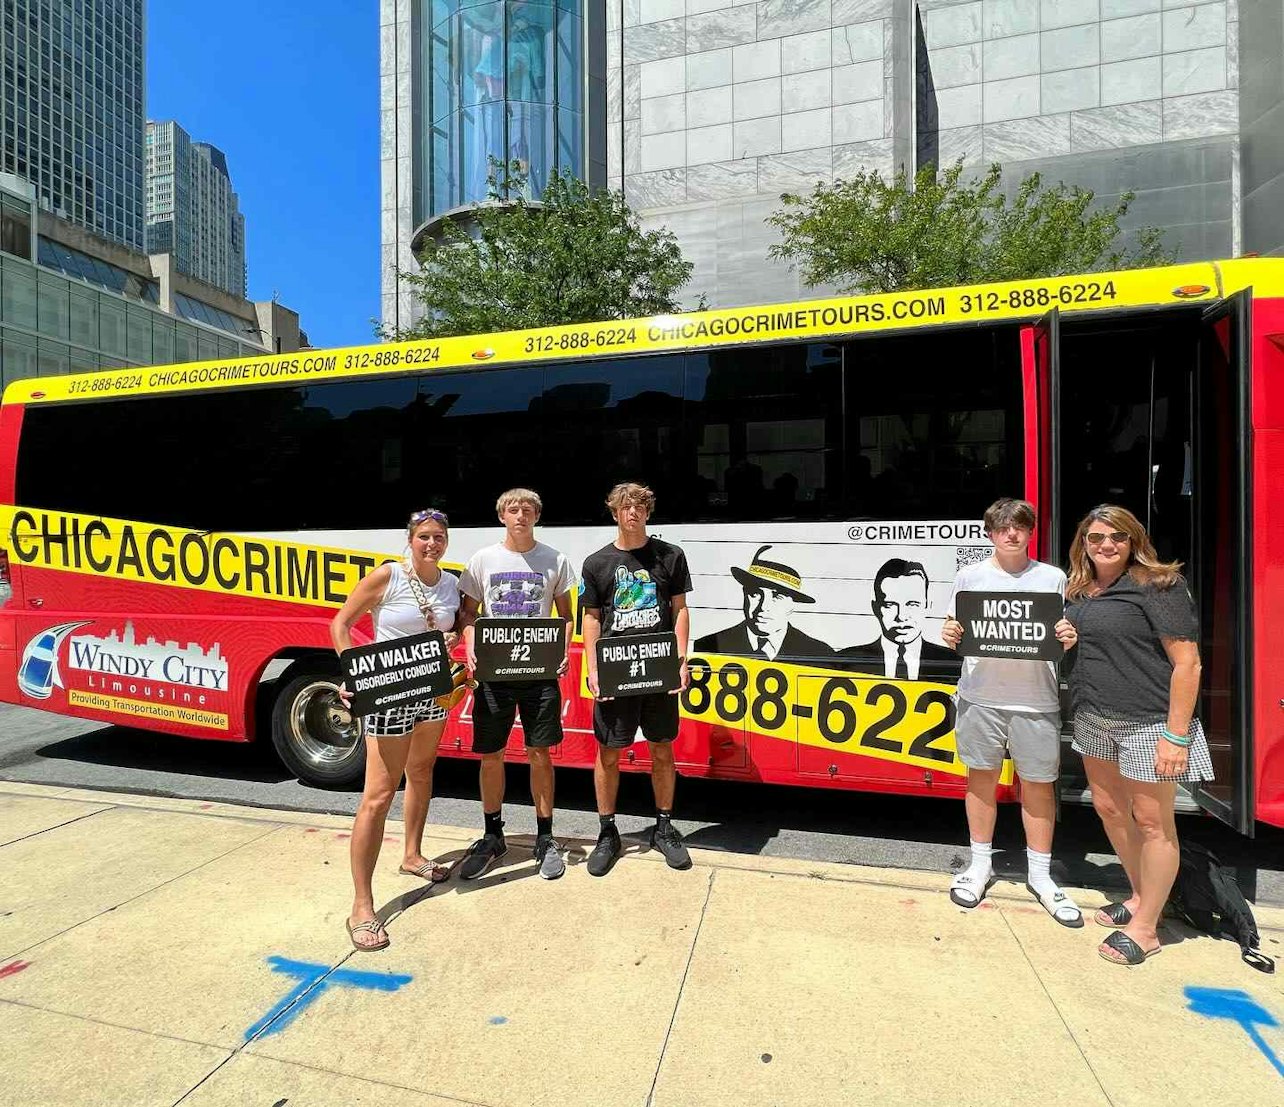 Chicago Crime & Mob Bus Tour: Criminals, Mobsters and Gangsters - Accommodations in Chicago